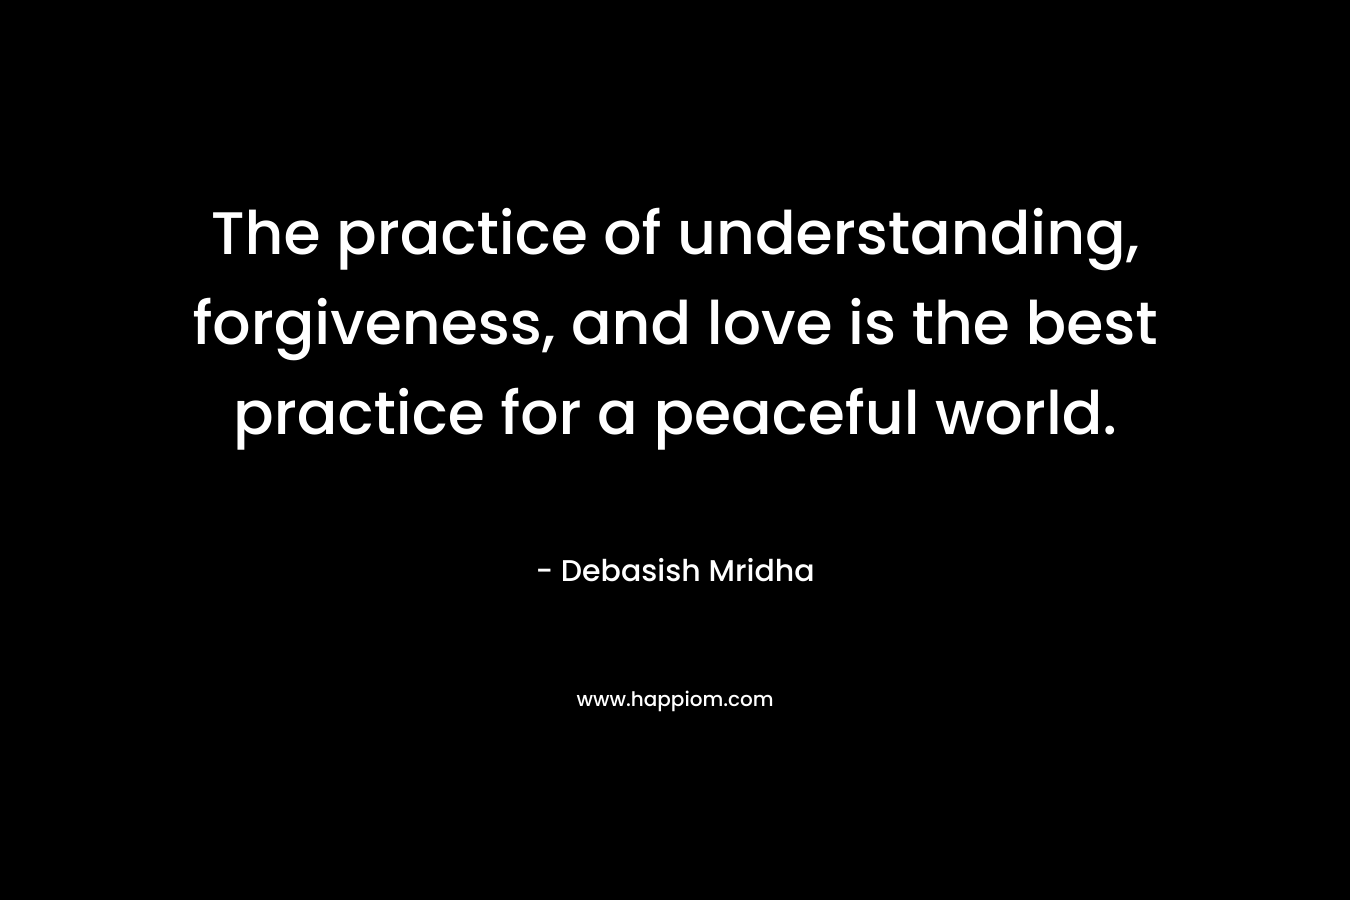 The practice of understanding, forgiveness, and love is the best practice for a peaceful world.